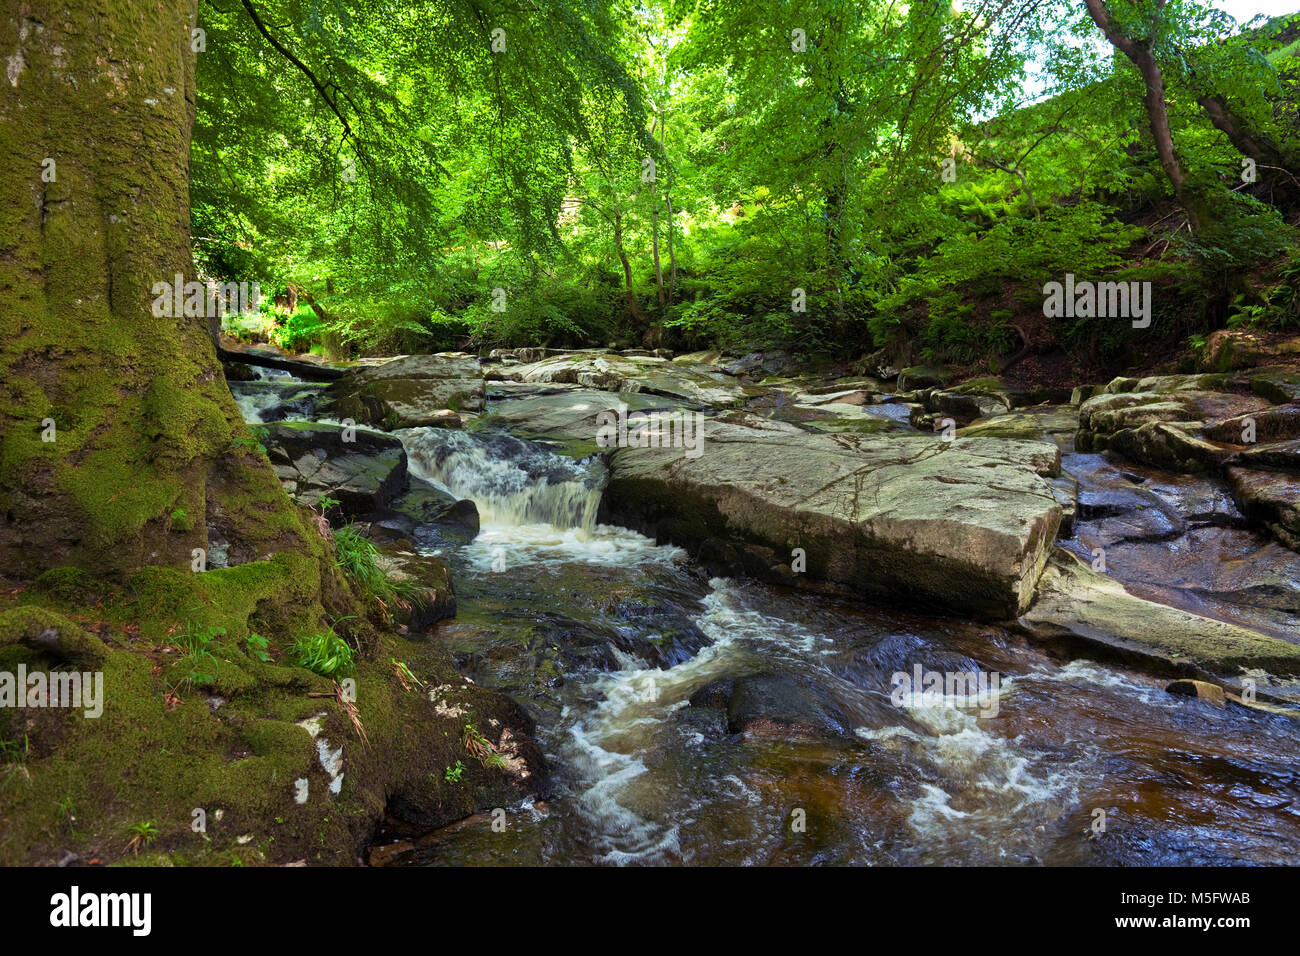 The Shankhill River shortly before in joins the River Liffey, near Clogleagh, County Wicklow, Ireland Stock Photo